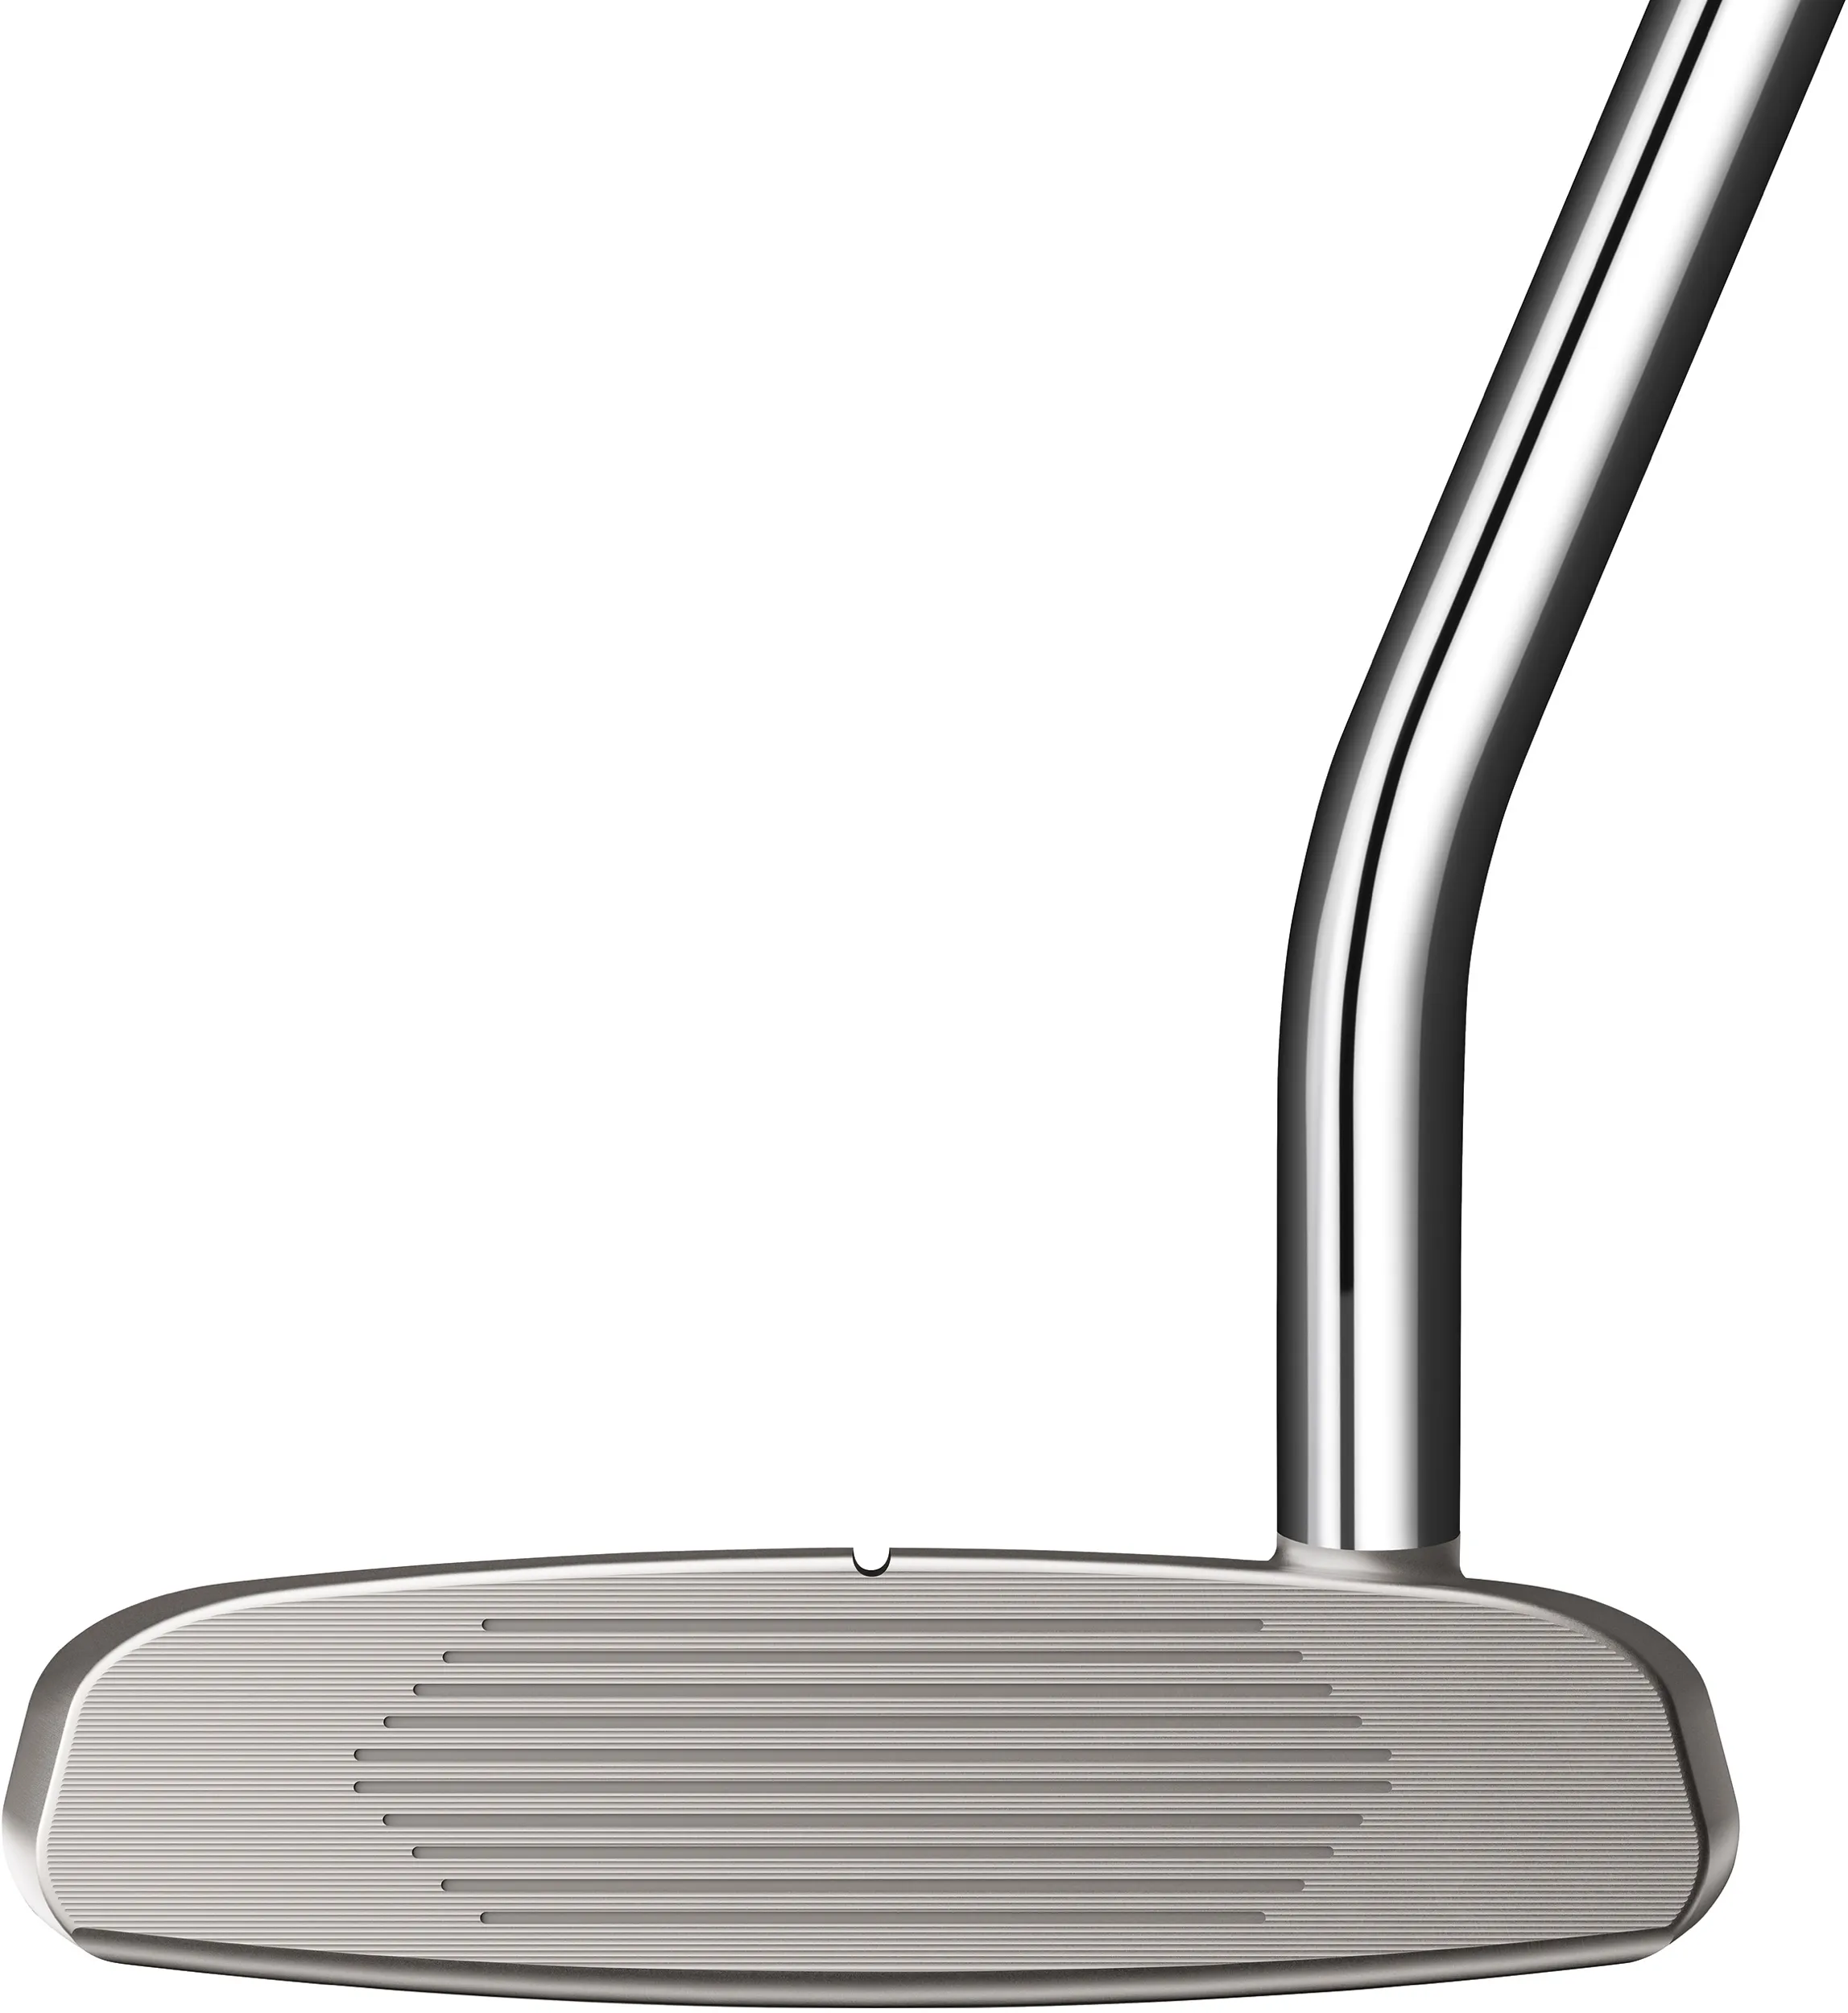 TaylorMade TP Reserve M27 Putter